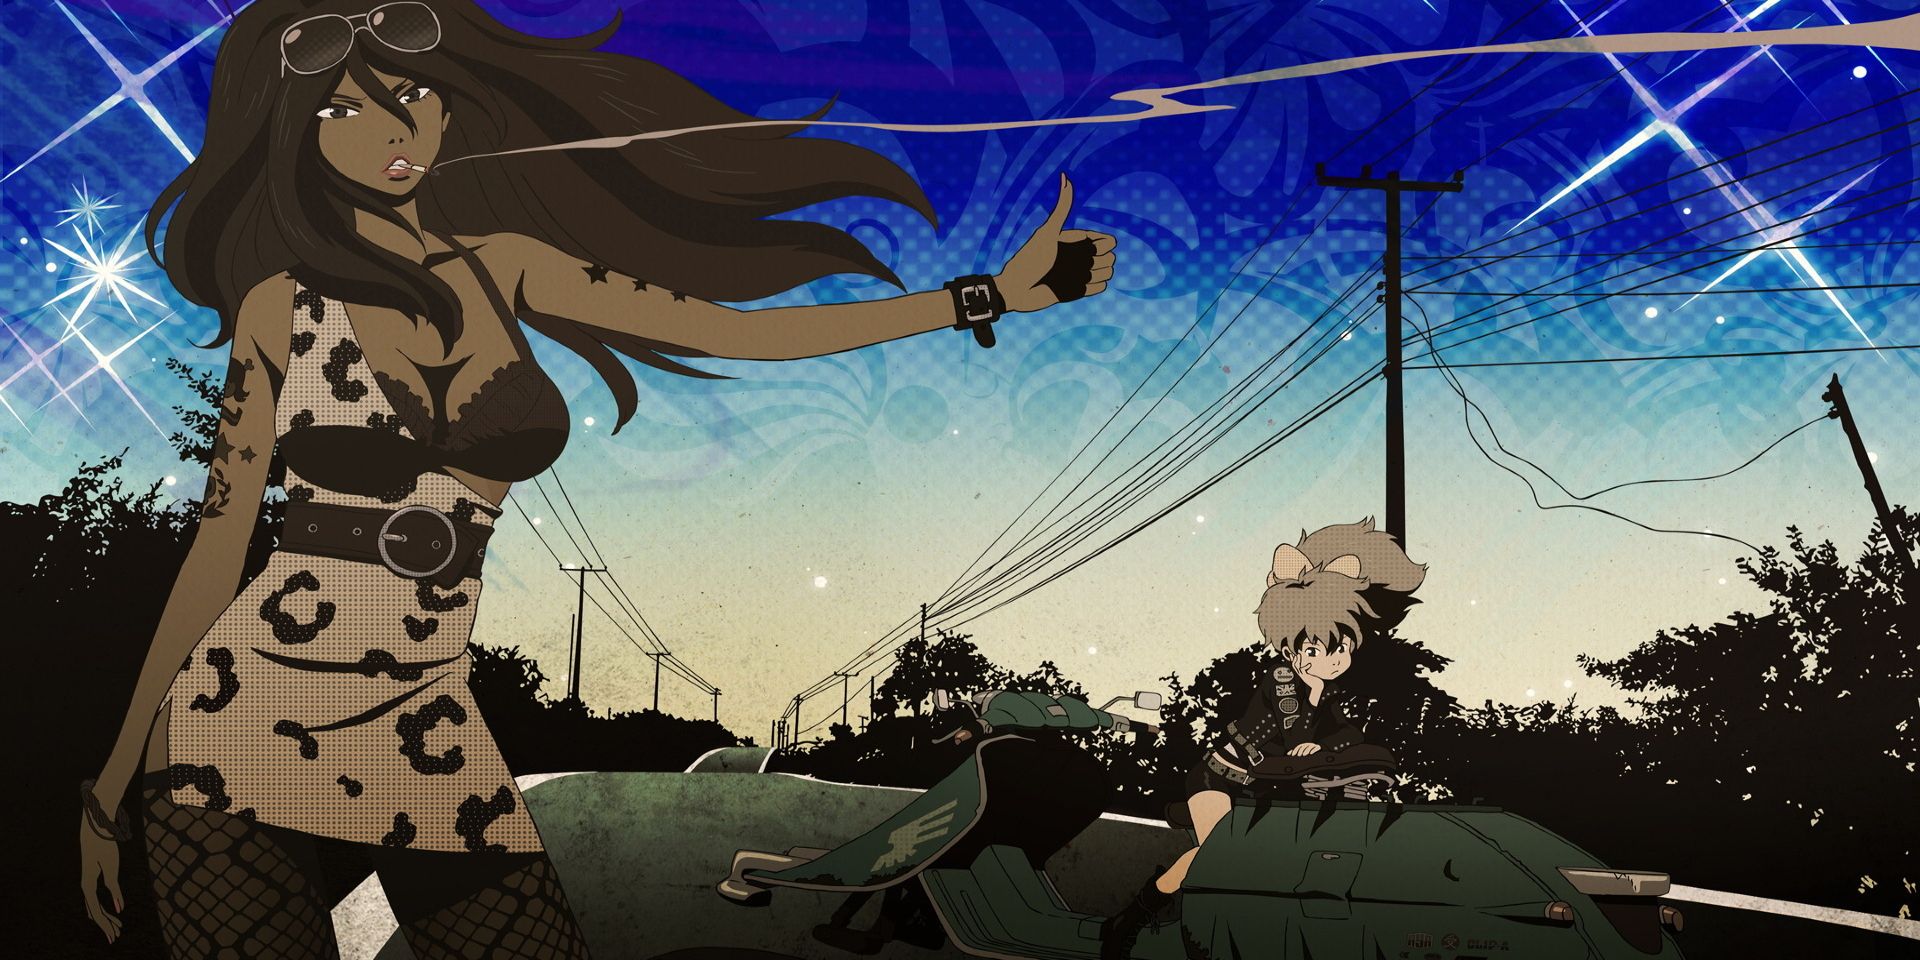 Art from the Michiko and Hatchin anime series.